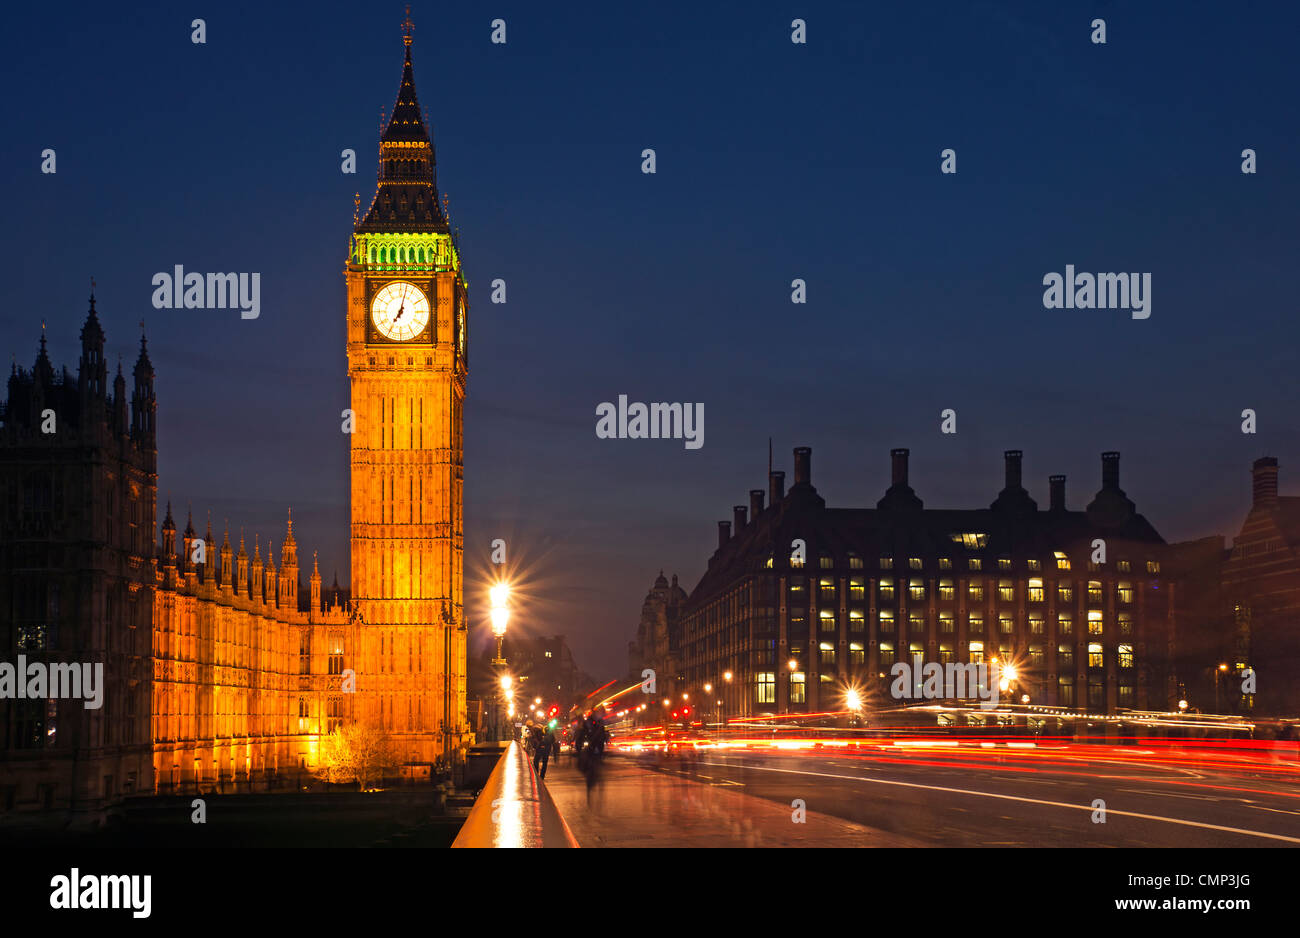 View towards Parliament and the clock tower housing Big Ben at dusk Stock Photo